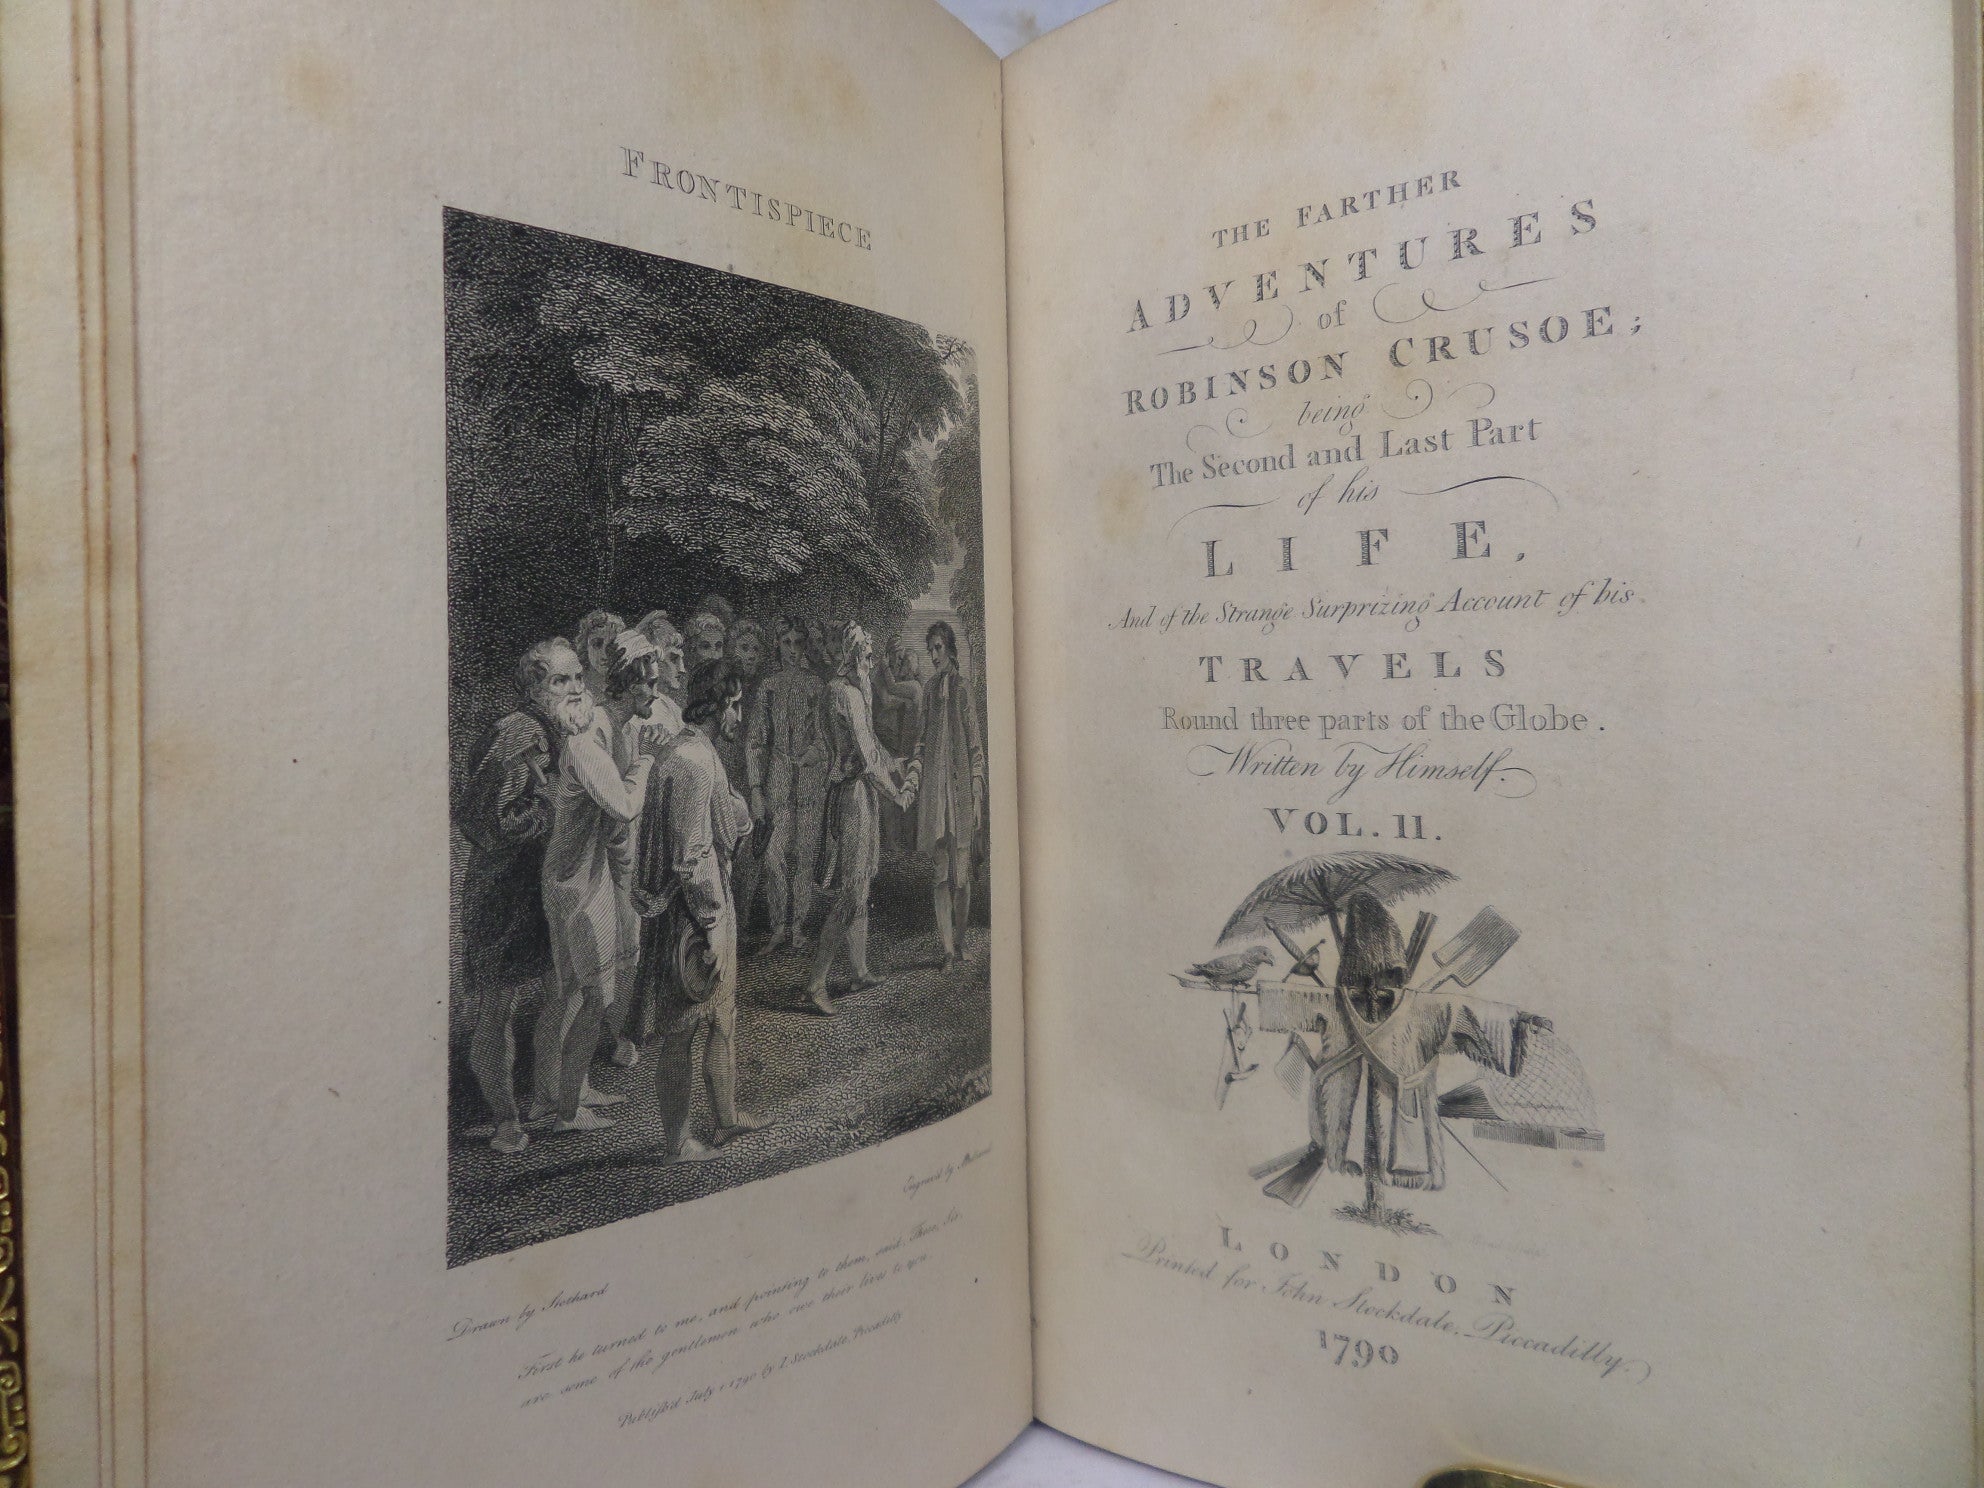 THE LIFE AND STRANGE SURPRIZING ADVENTURES OF ROBINSON CRUSOE BY DANIEL DEFOE 1790, FIRST STOCKDALE EDITION FINELY BOUND BY SOTHERAN